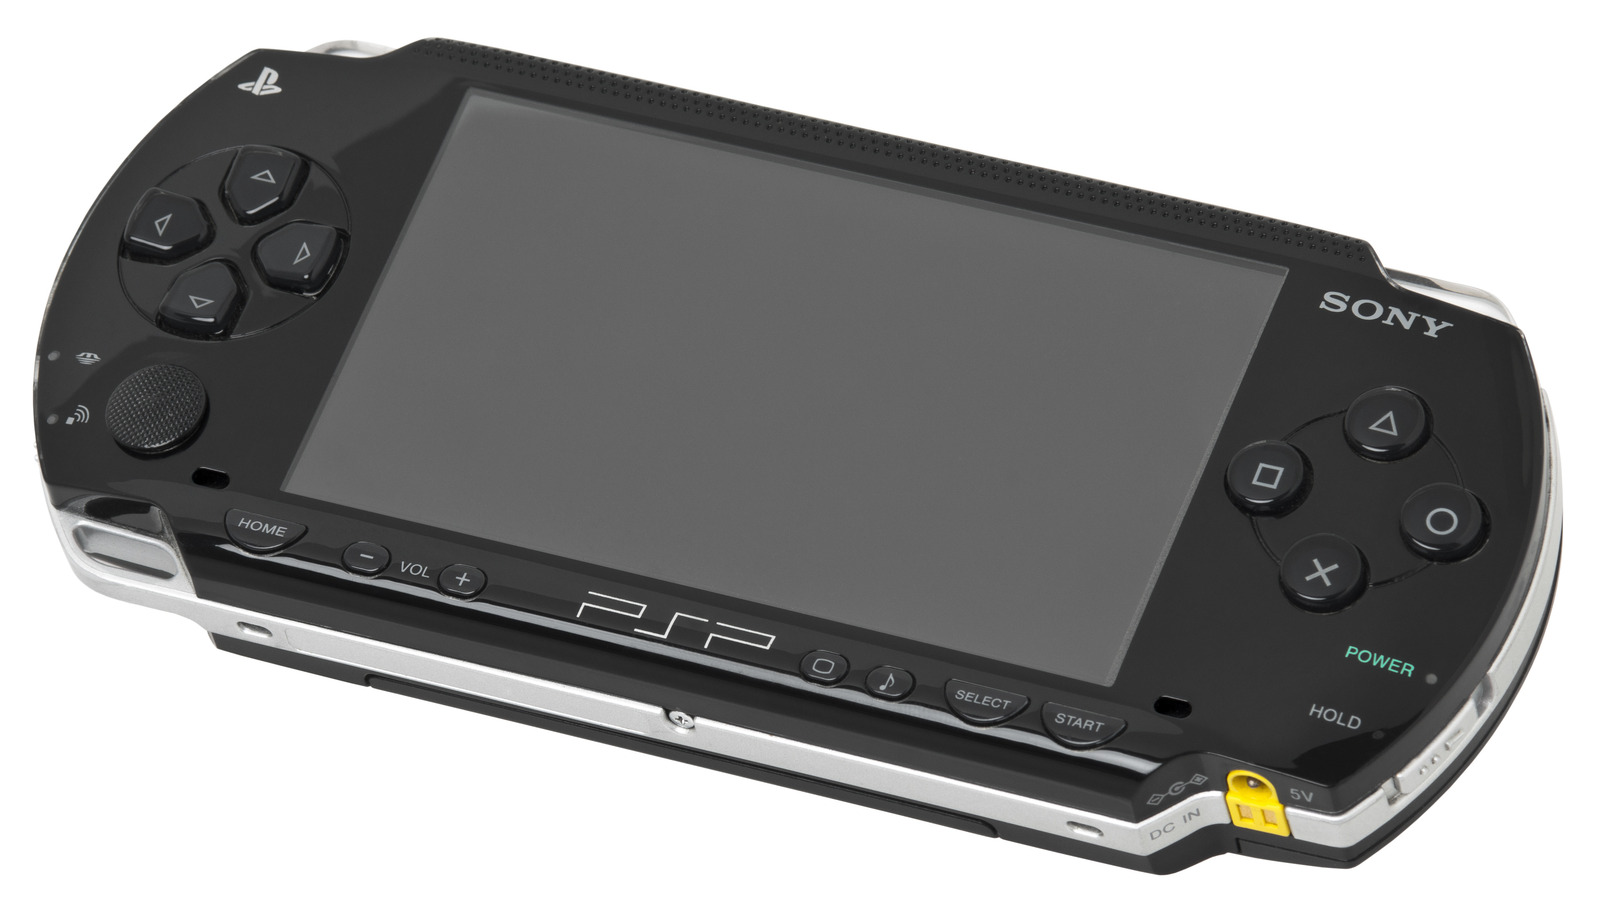 A NEW PLAYSTATION PORTABLE? - Don't F*** This Up Sony! - Electric  Playground 